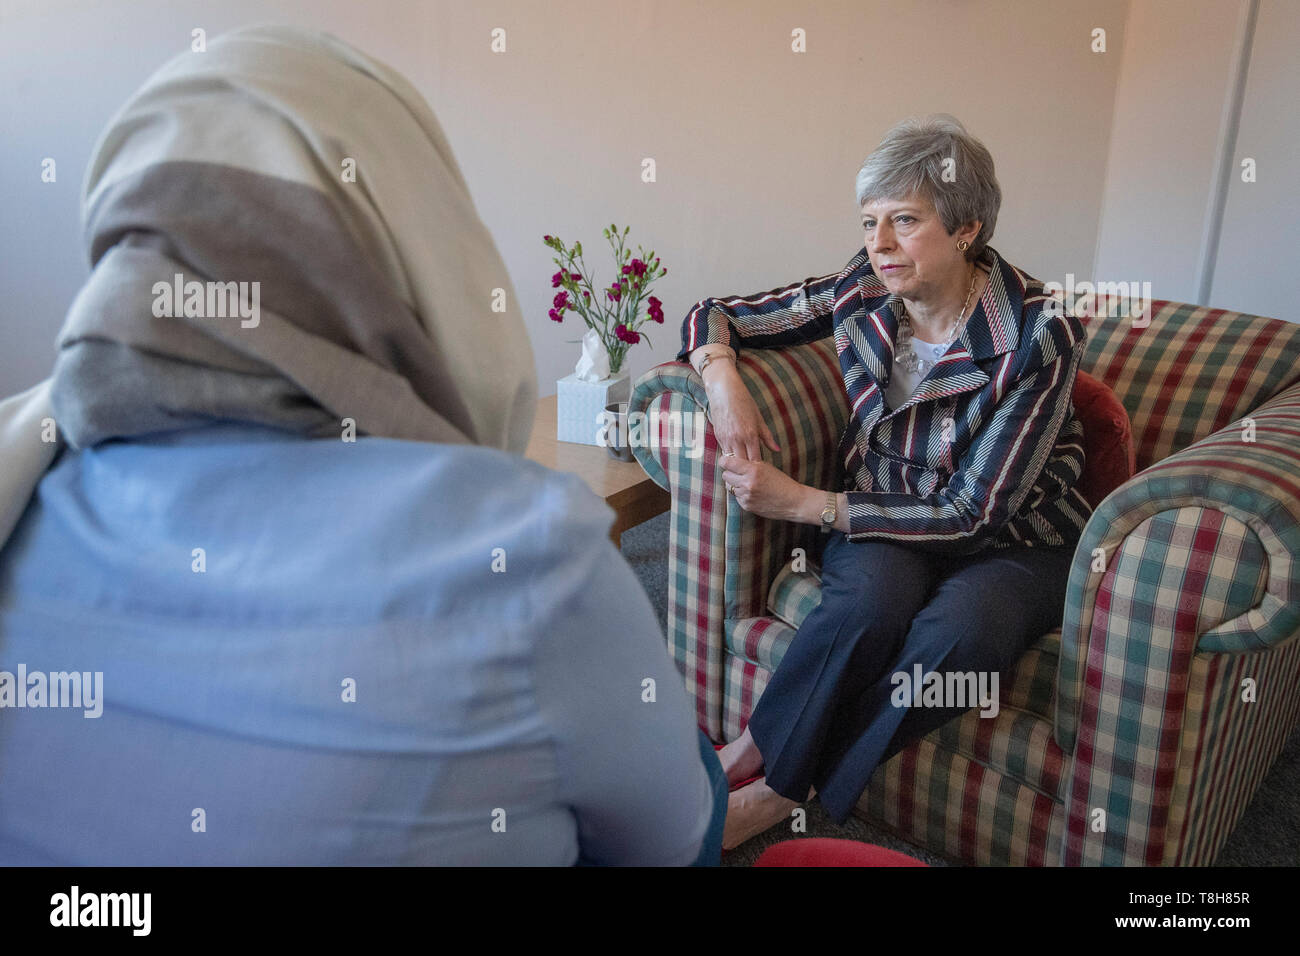 Prime Minister Theresa May talks with a survivor of domestic violence at Advance Charity offices in West London where she discussed support for victims of domestic violence. Stock Photo